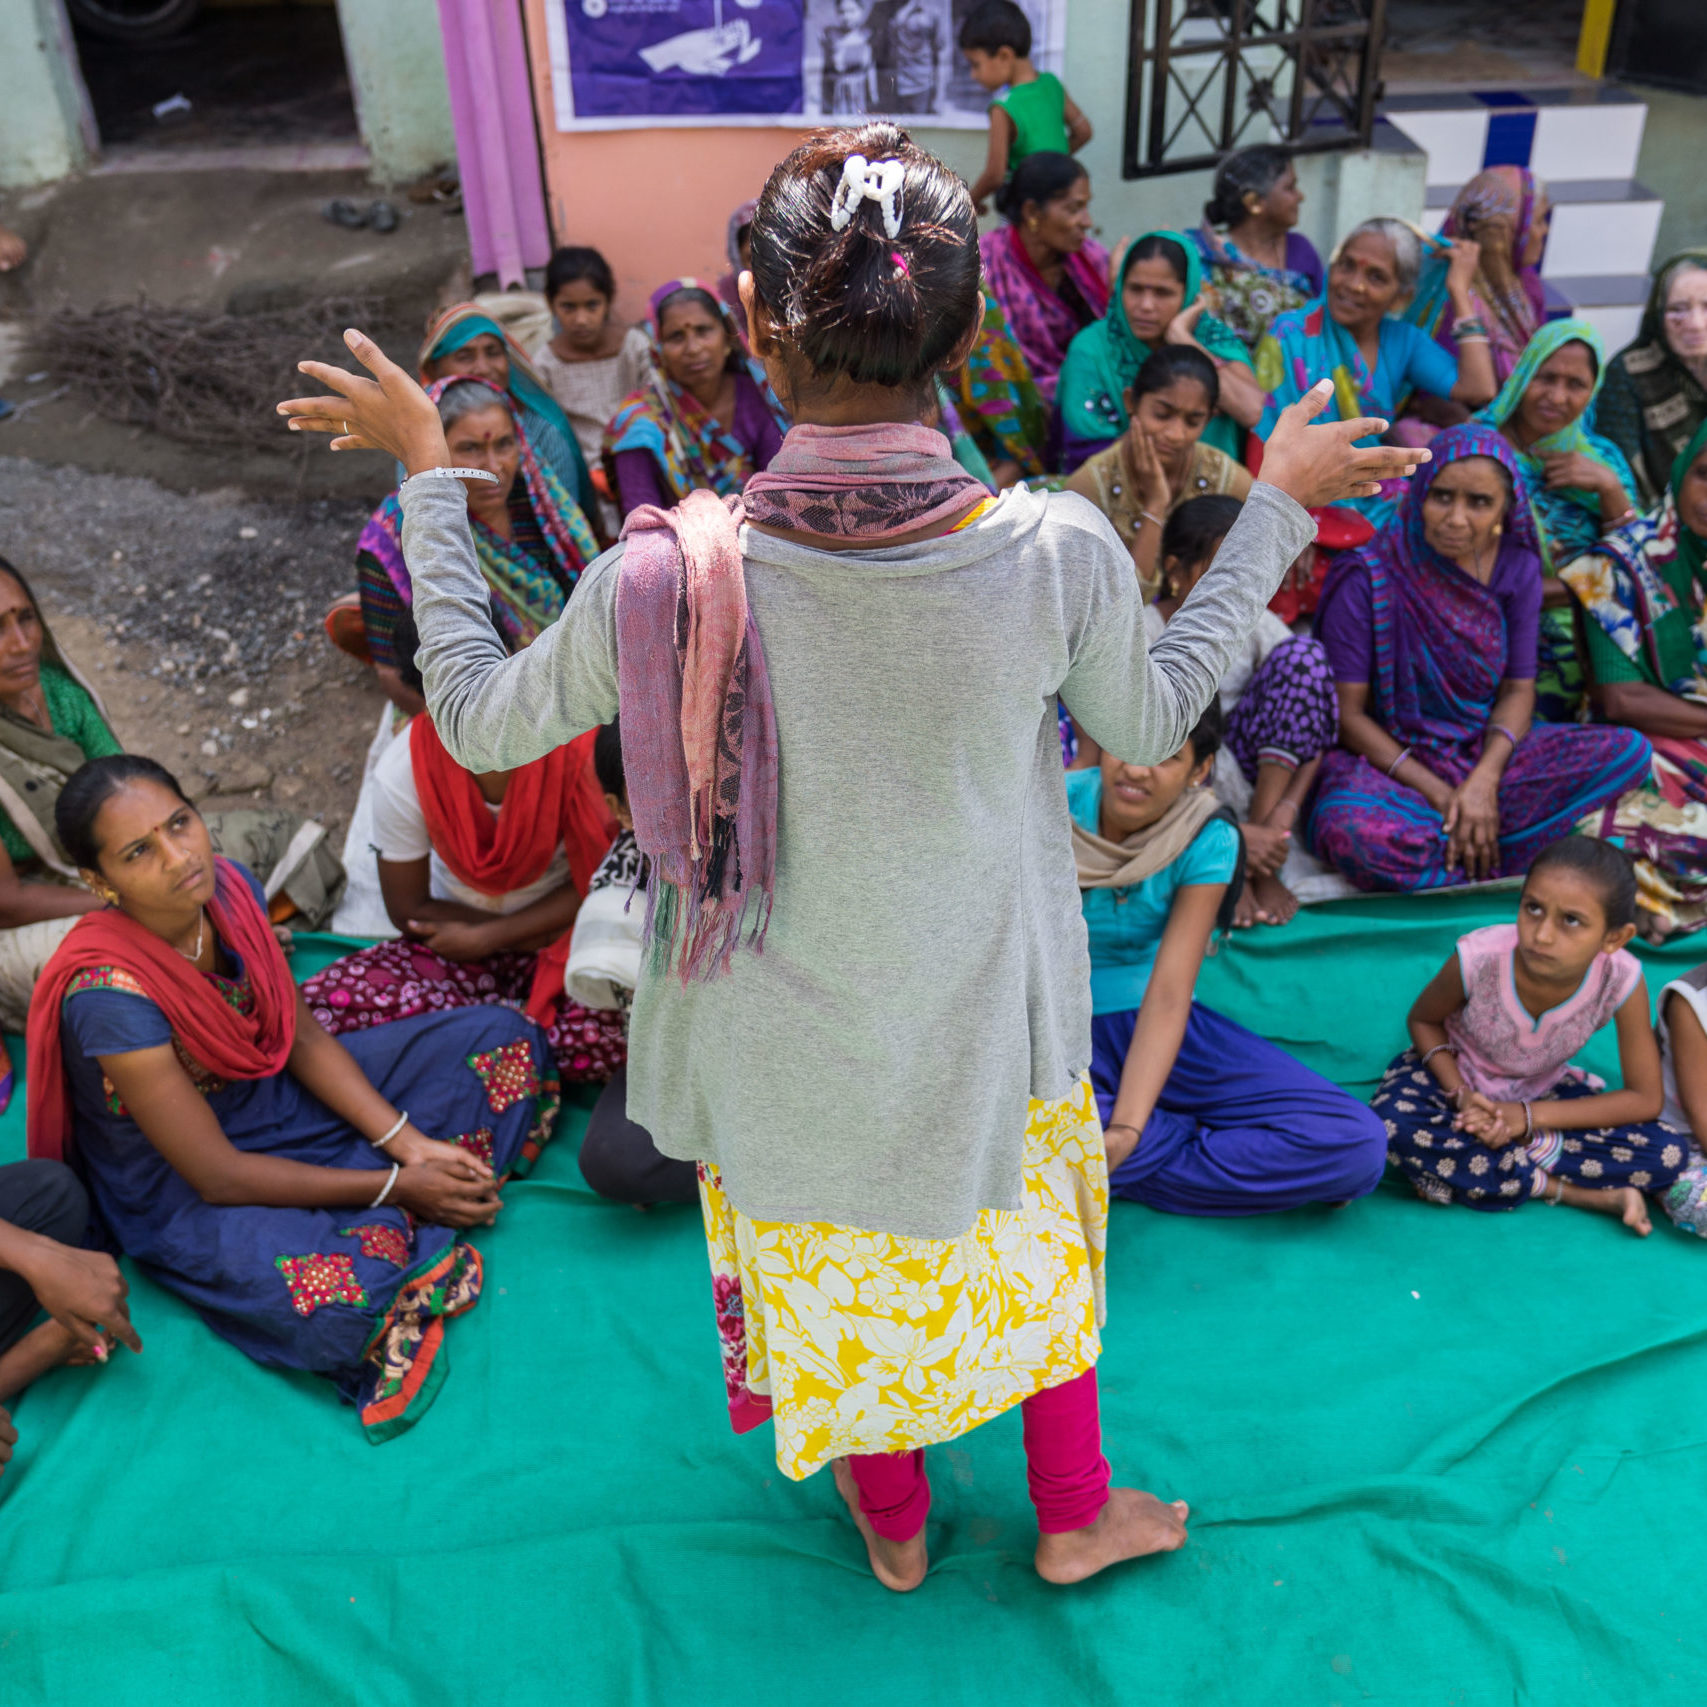 A woman presents to a seated group of women outdoors in India.